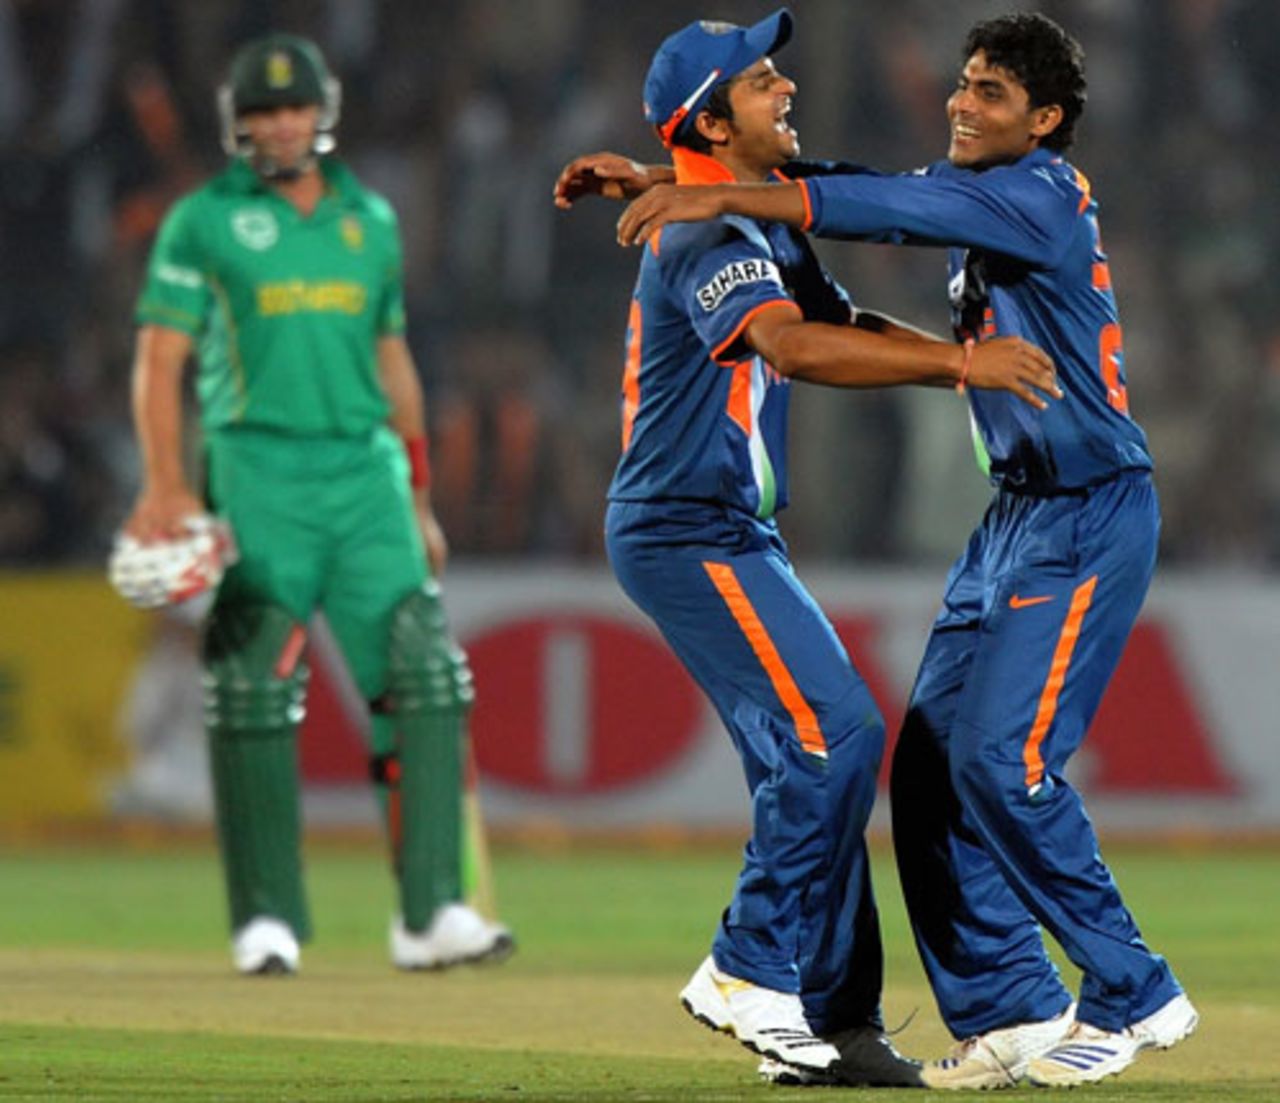 Ravindra Jadeja bowled a tight spell and picked two wickets, India v South Africa, 1st ODI, Jaipur, February 21, 2010